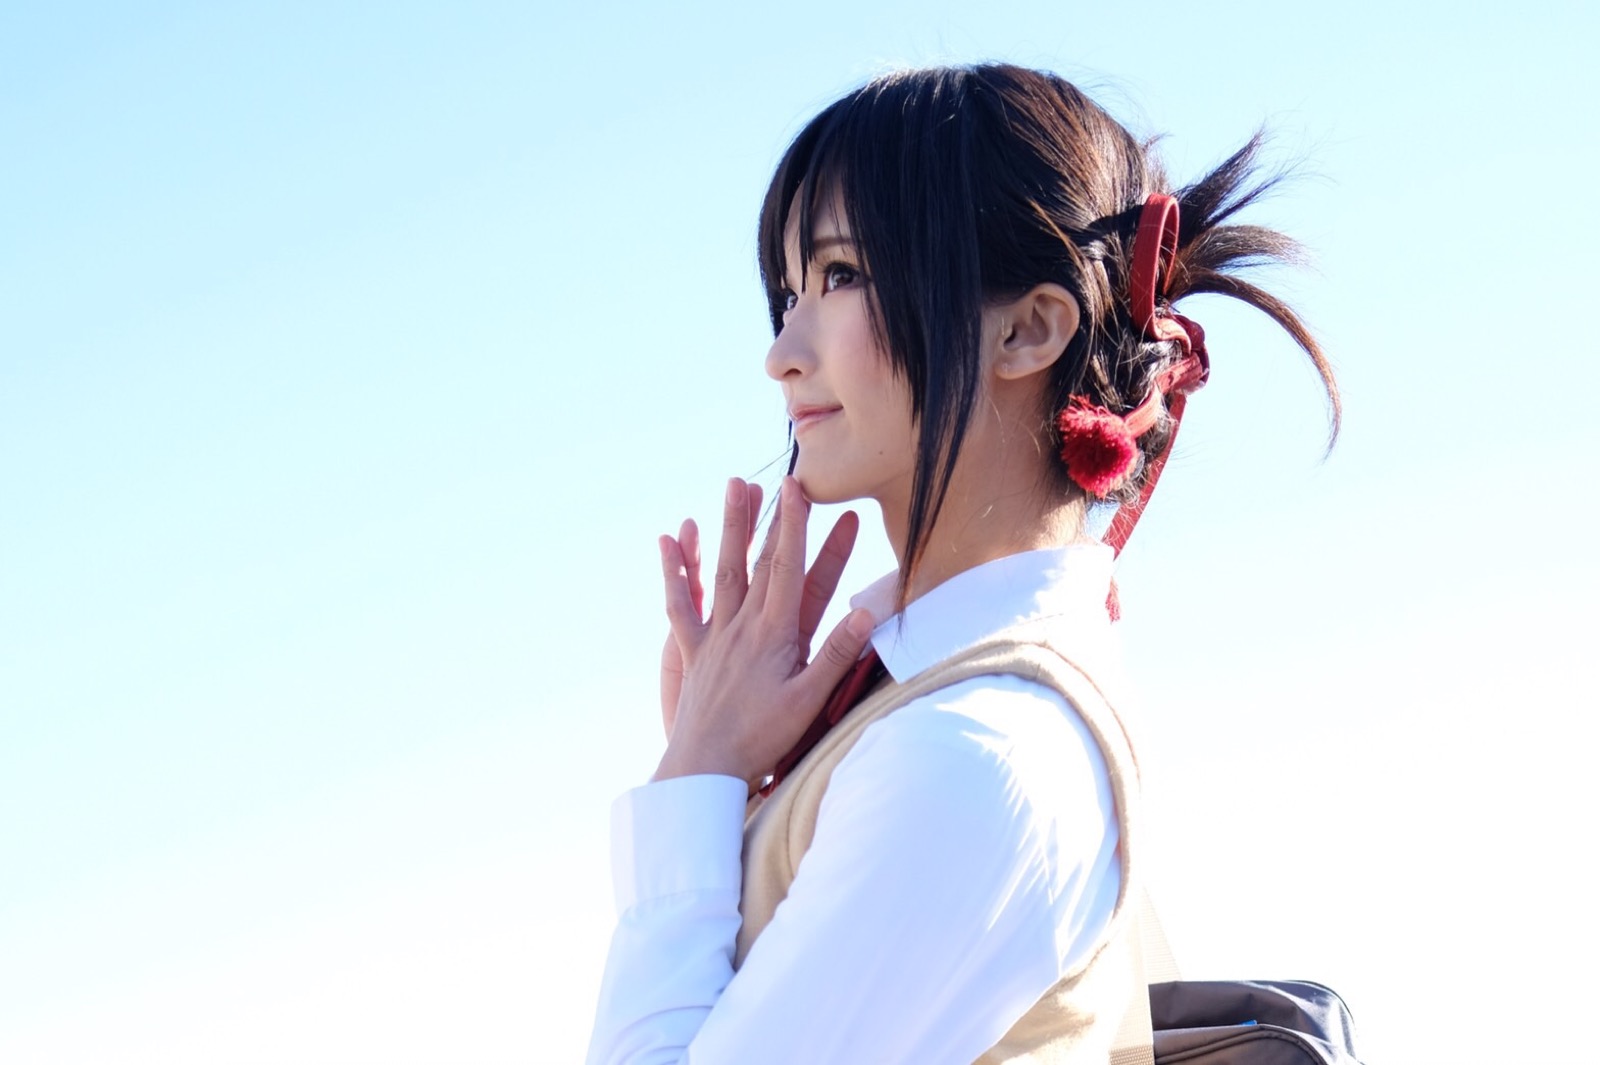 Comiket 91 Cosplay Collection: Heating Up the Tokyo Seaside in Winter